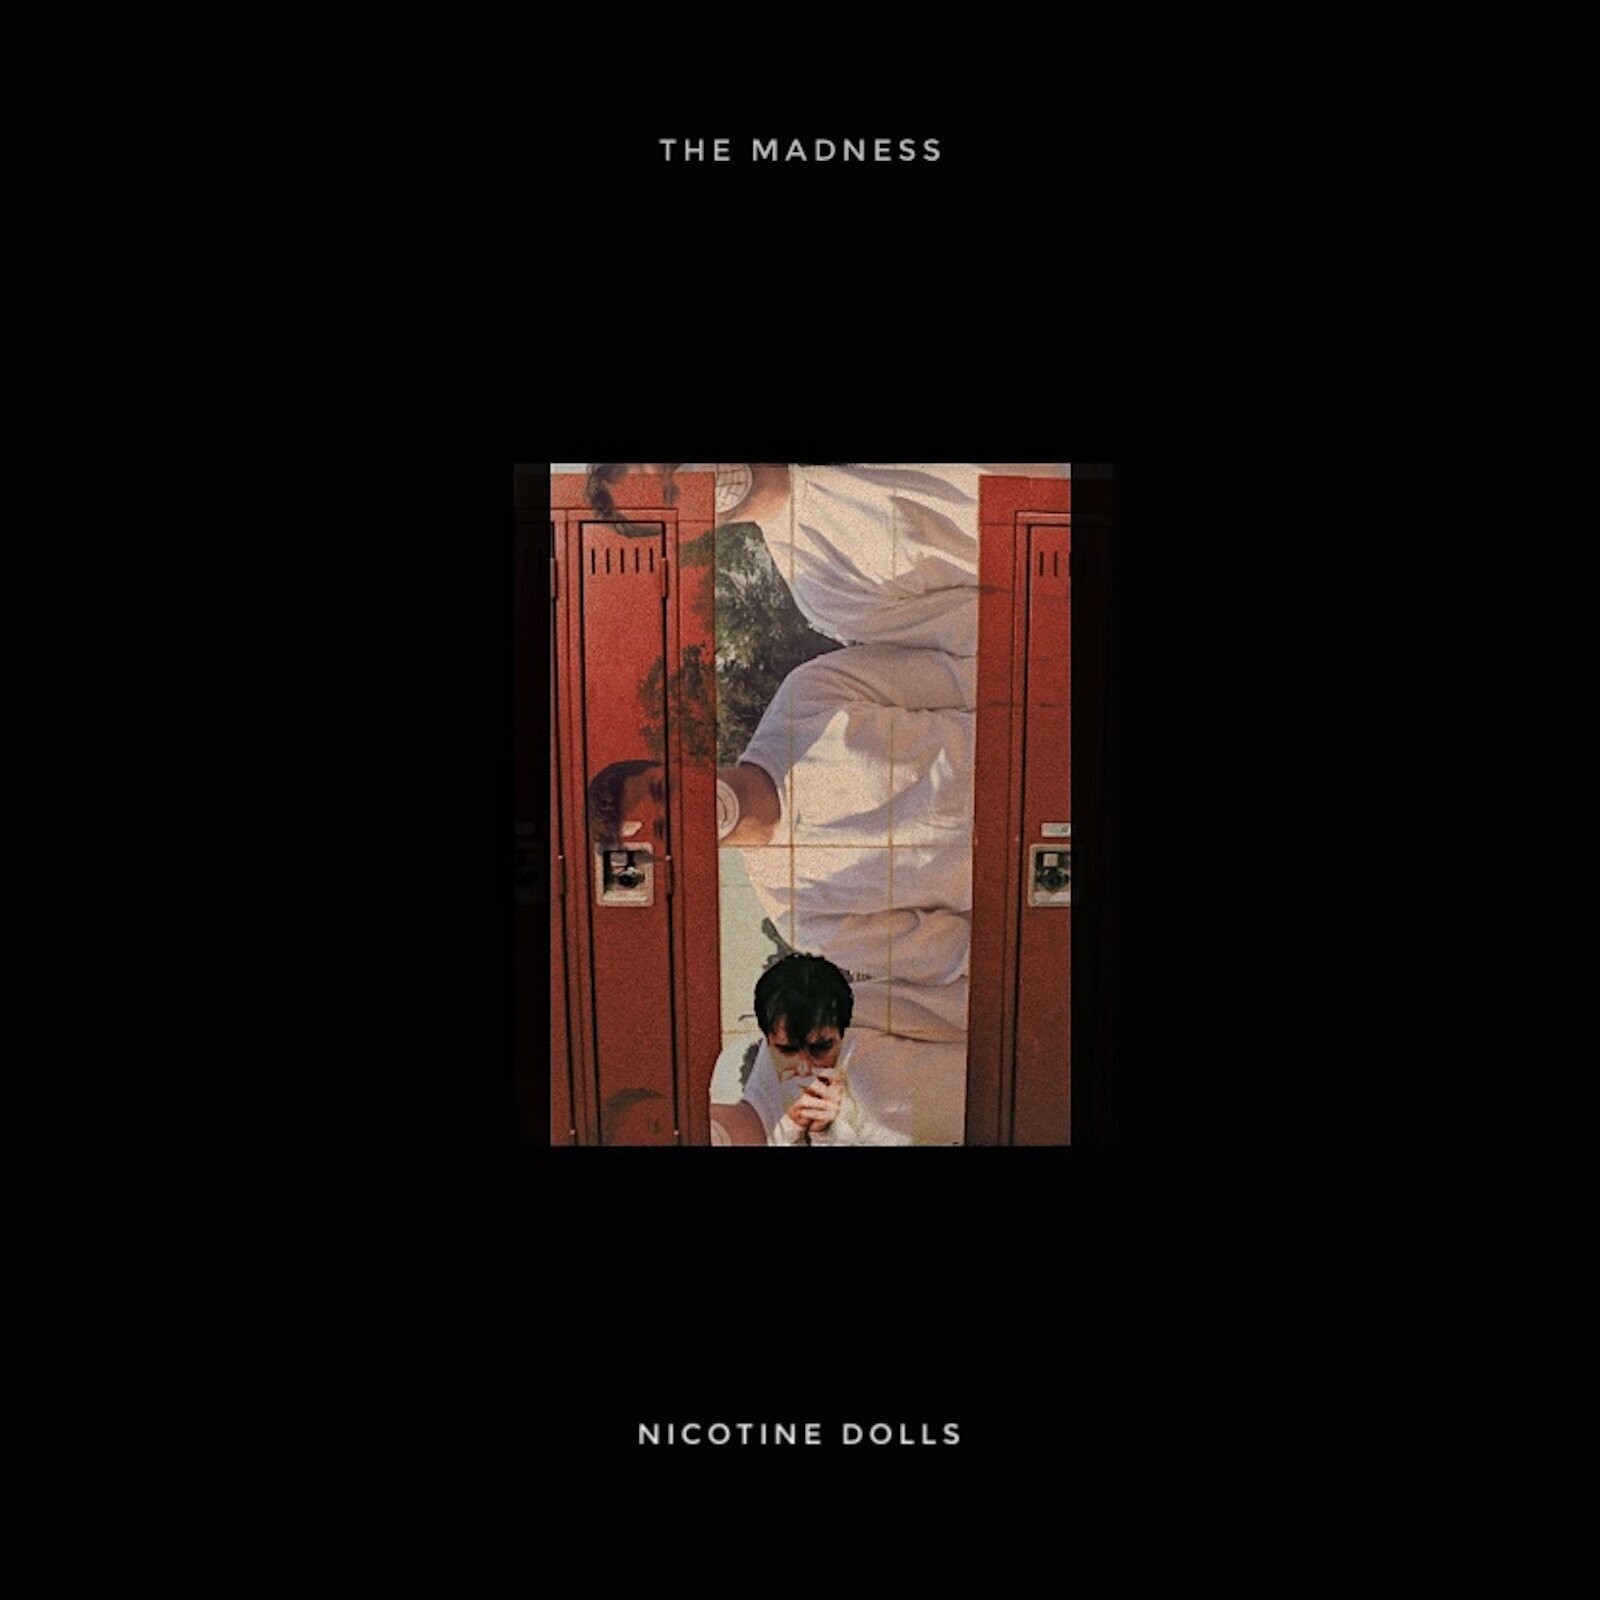 The+Madness+%28cover+art%29.jpg